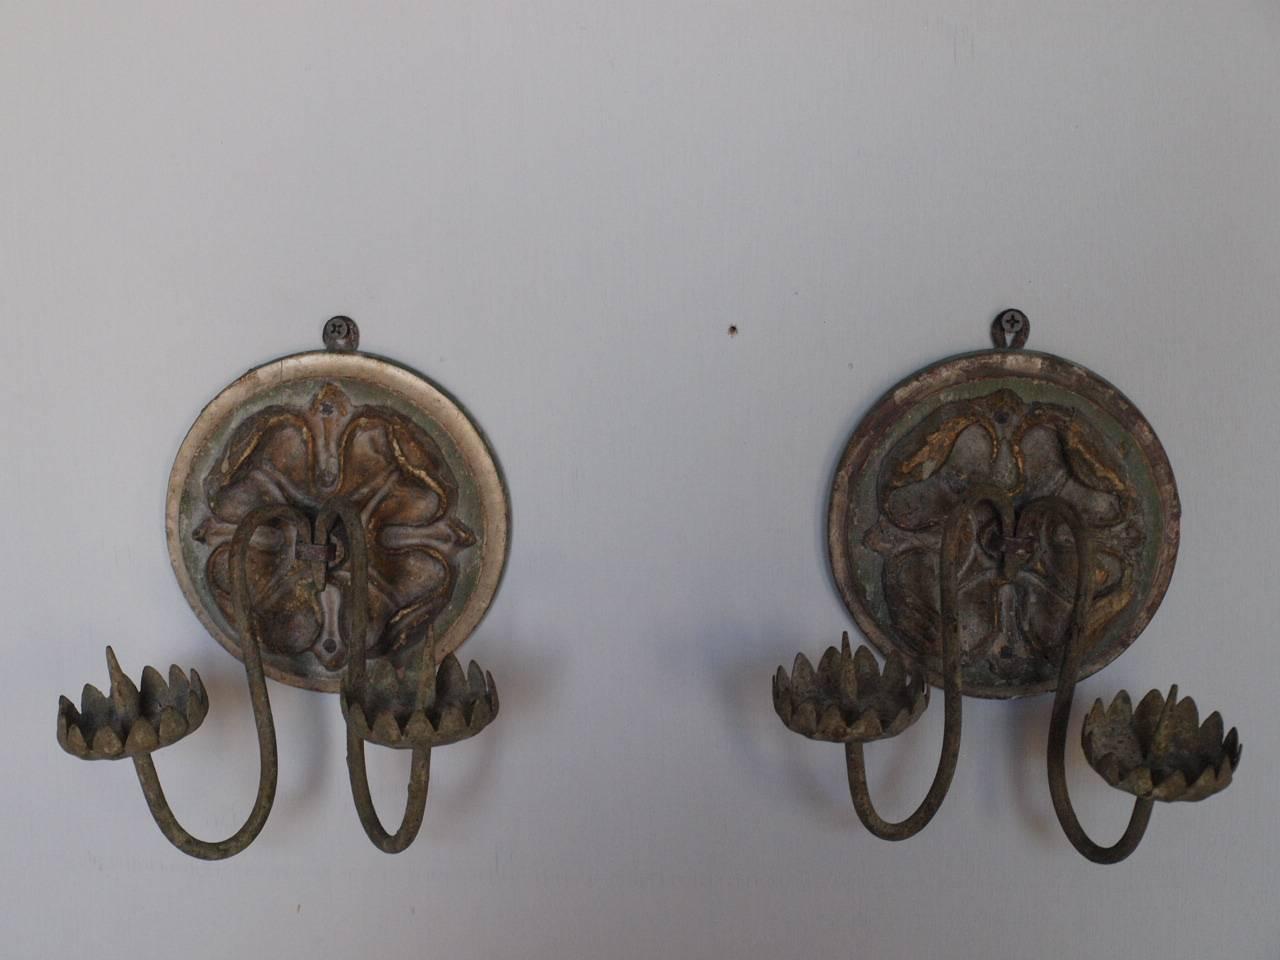 A very beautiful pair of 18th century sconces, appliques from Northern Italy. Beautifully constructed from silver giltwood, papier-mâché medallions and hand-forged iron. Understated and elegant. The back disk measures 5 1/4 in diameter.